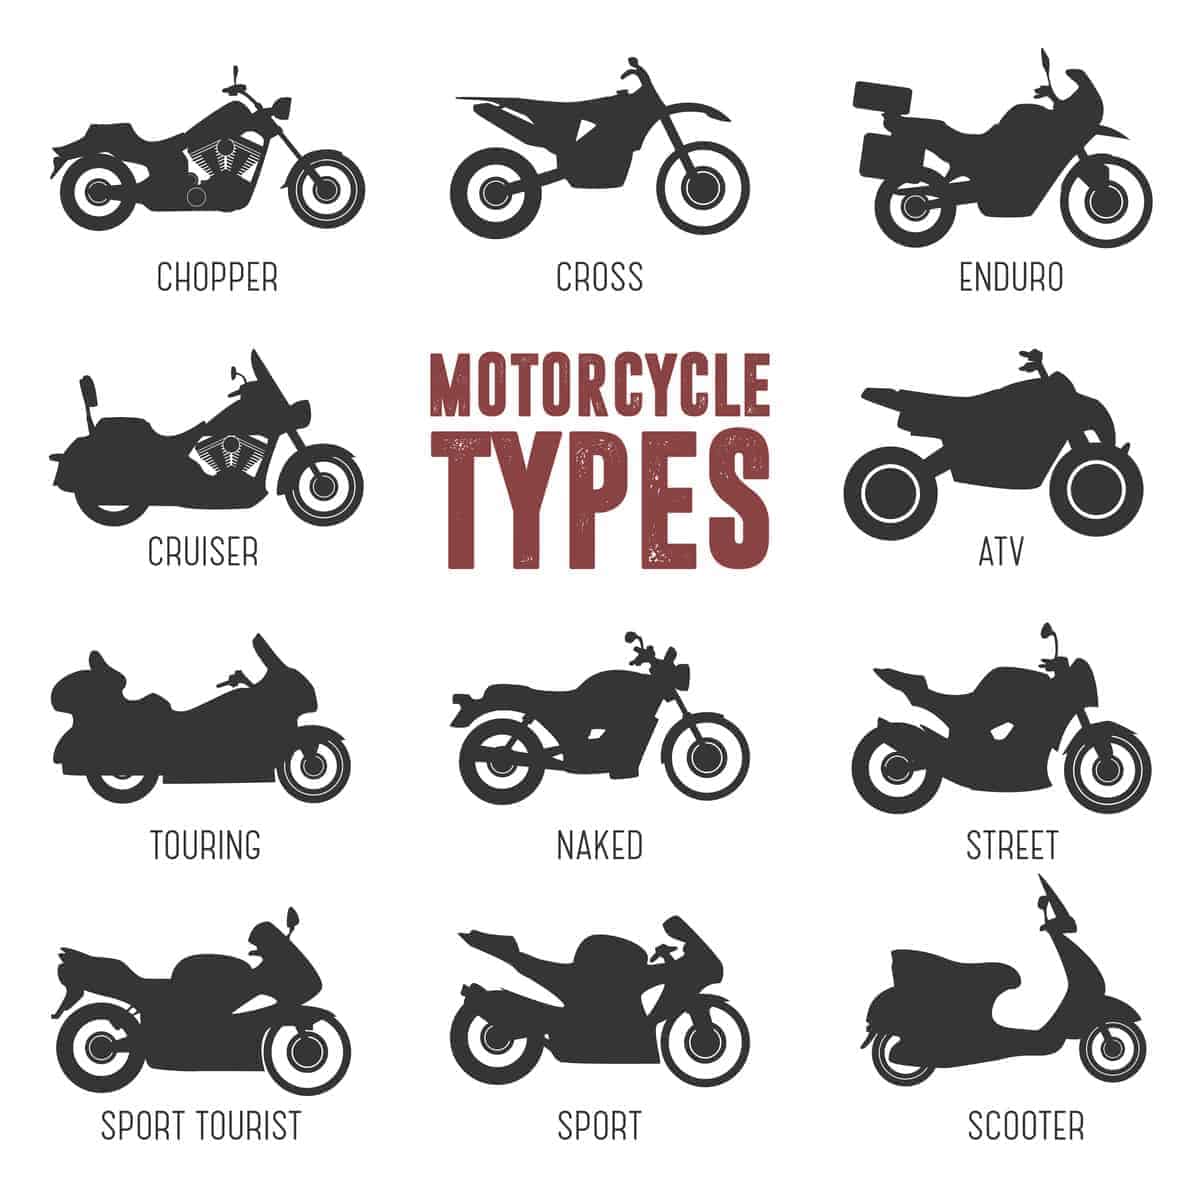 Types-of-motorcycles-chart-june252020